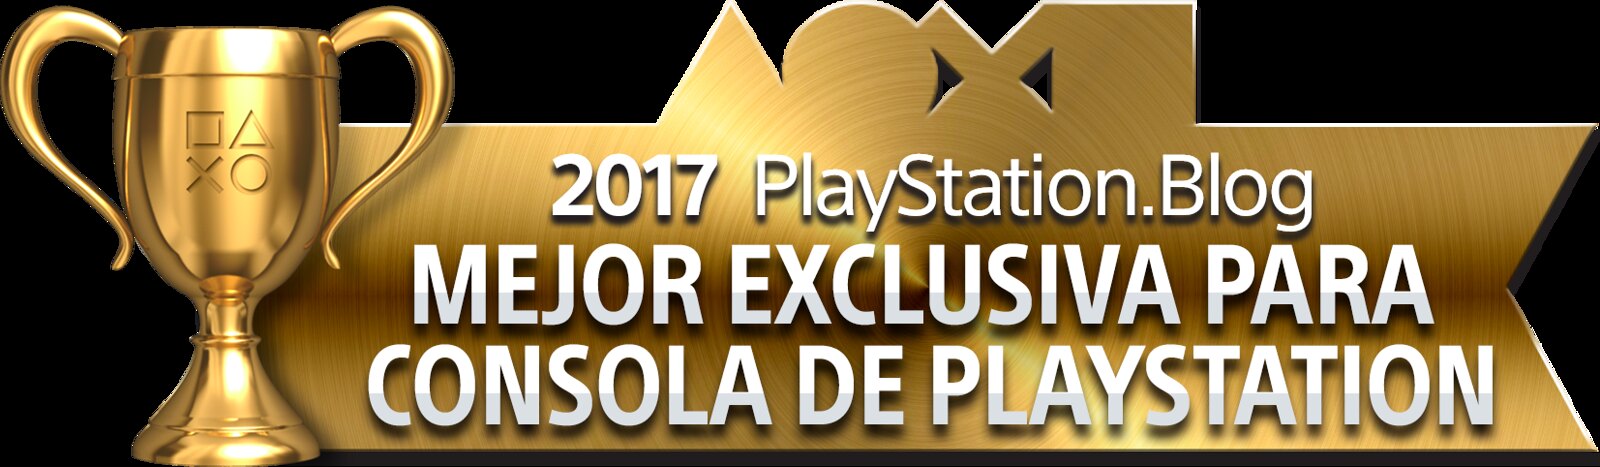 PlayStation Blog Game of the Year 2017 - Best PlayStation Console Exclusive (Gold)